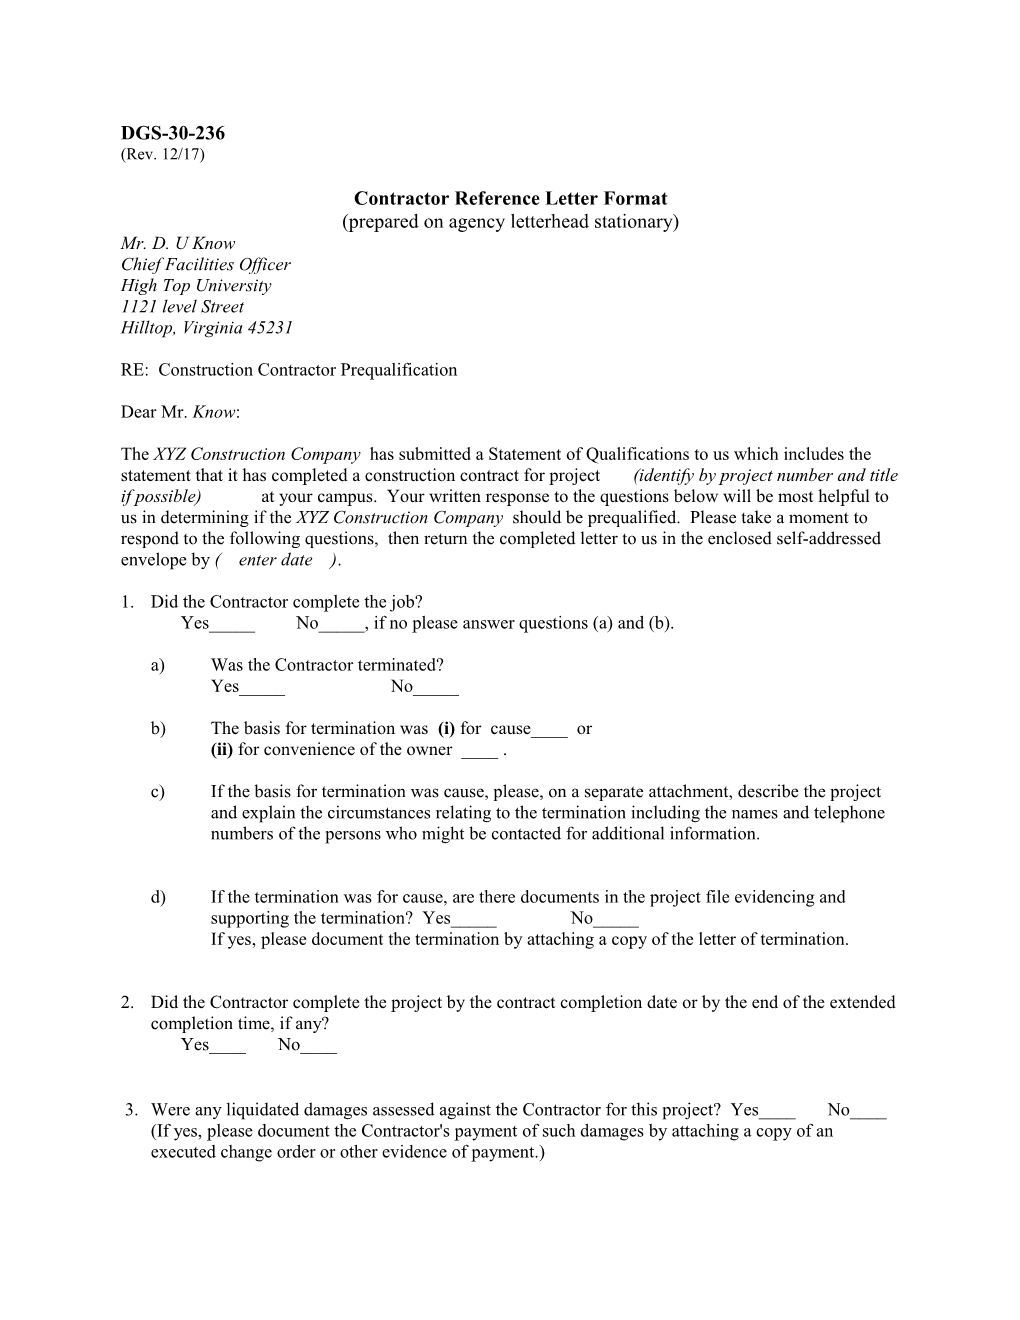 Contractor Reference Letter Format